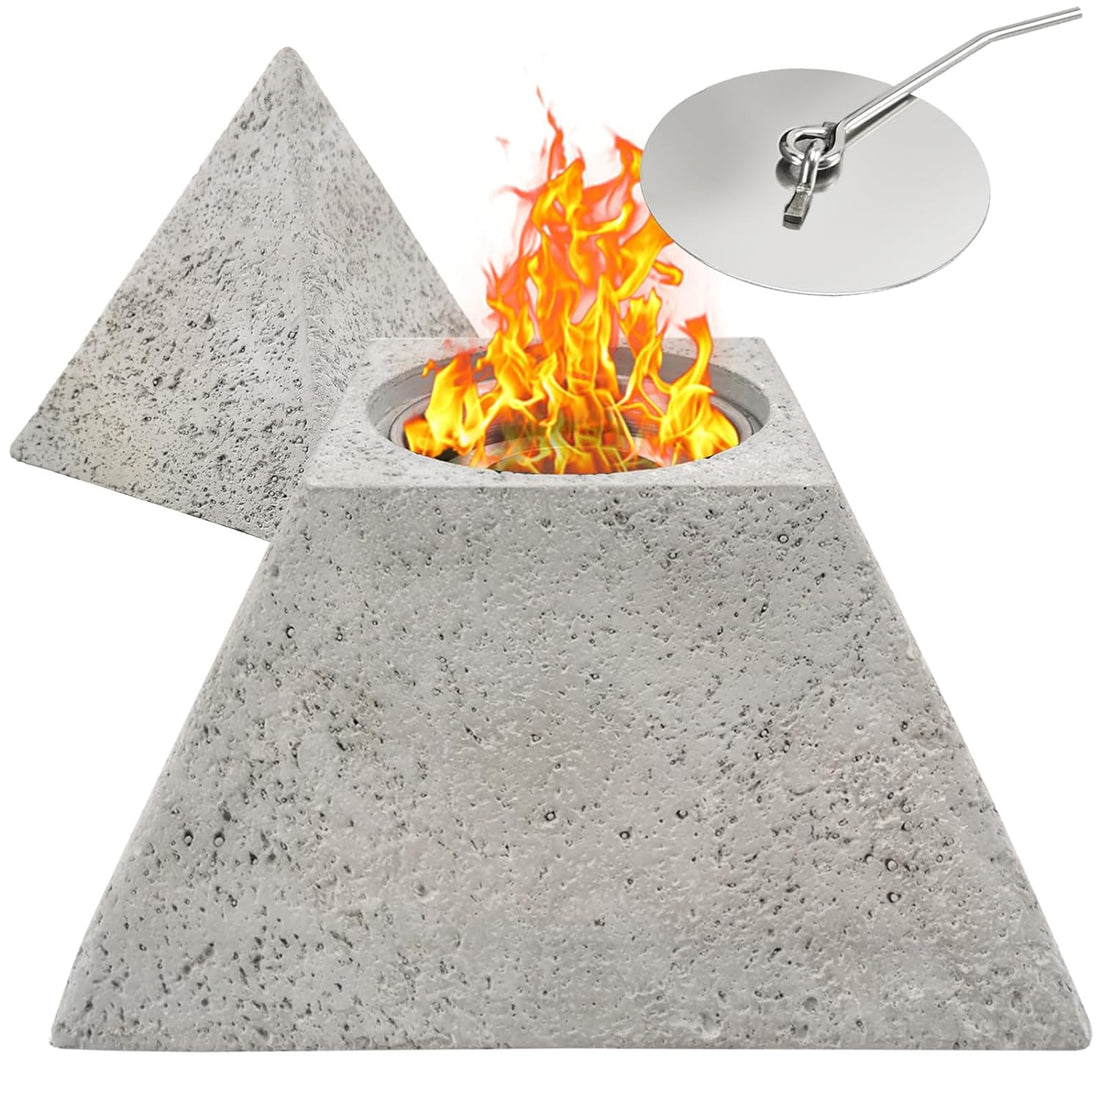 HIOSTAO Portable Pyramid Type Tabletop Fire Pit Smokeless,Concret Rubbing Alcohol Fireplace for Indoor Table and Outdoor Patio